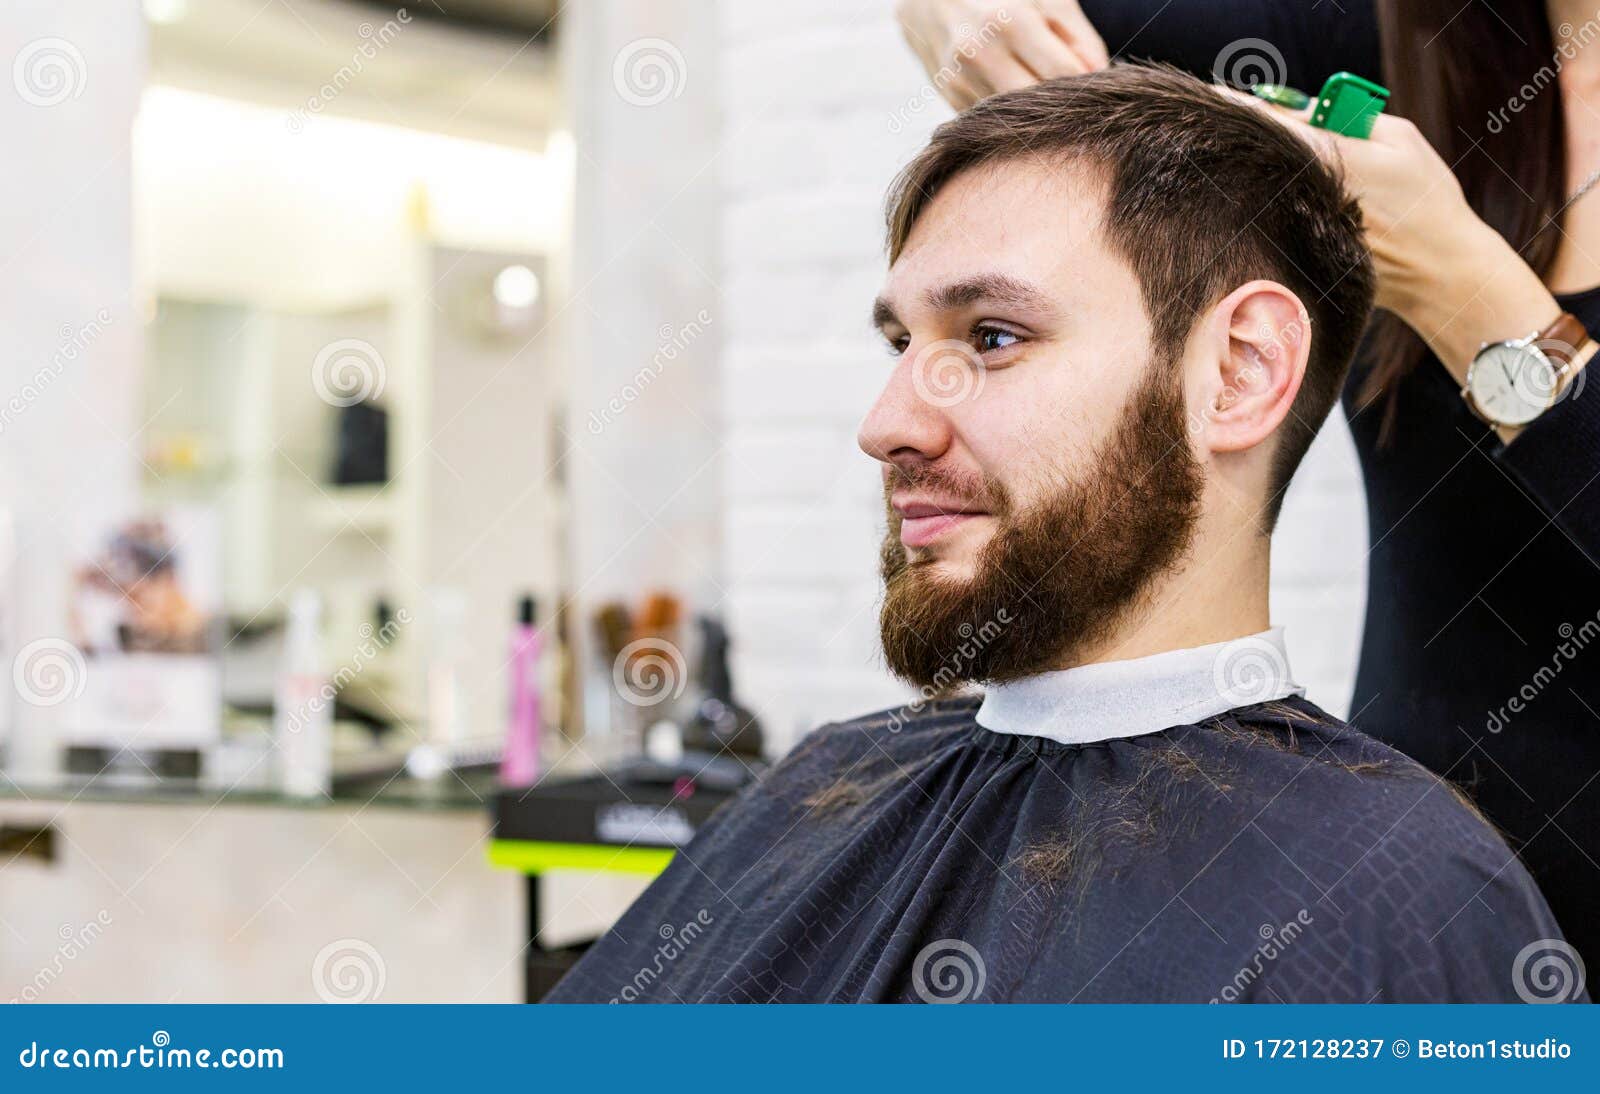 Hairdresser Doing Haircut for Male Client, Man with Beard Using  Professional Hairdresser Tools, Equipment on Hairdresser Work Stock Image -  Image of haircut, fashion: 172128237